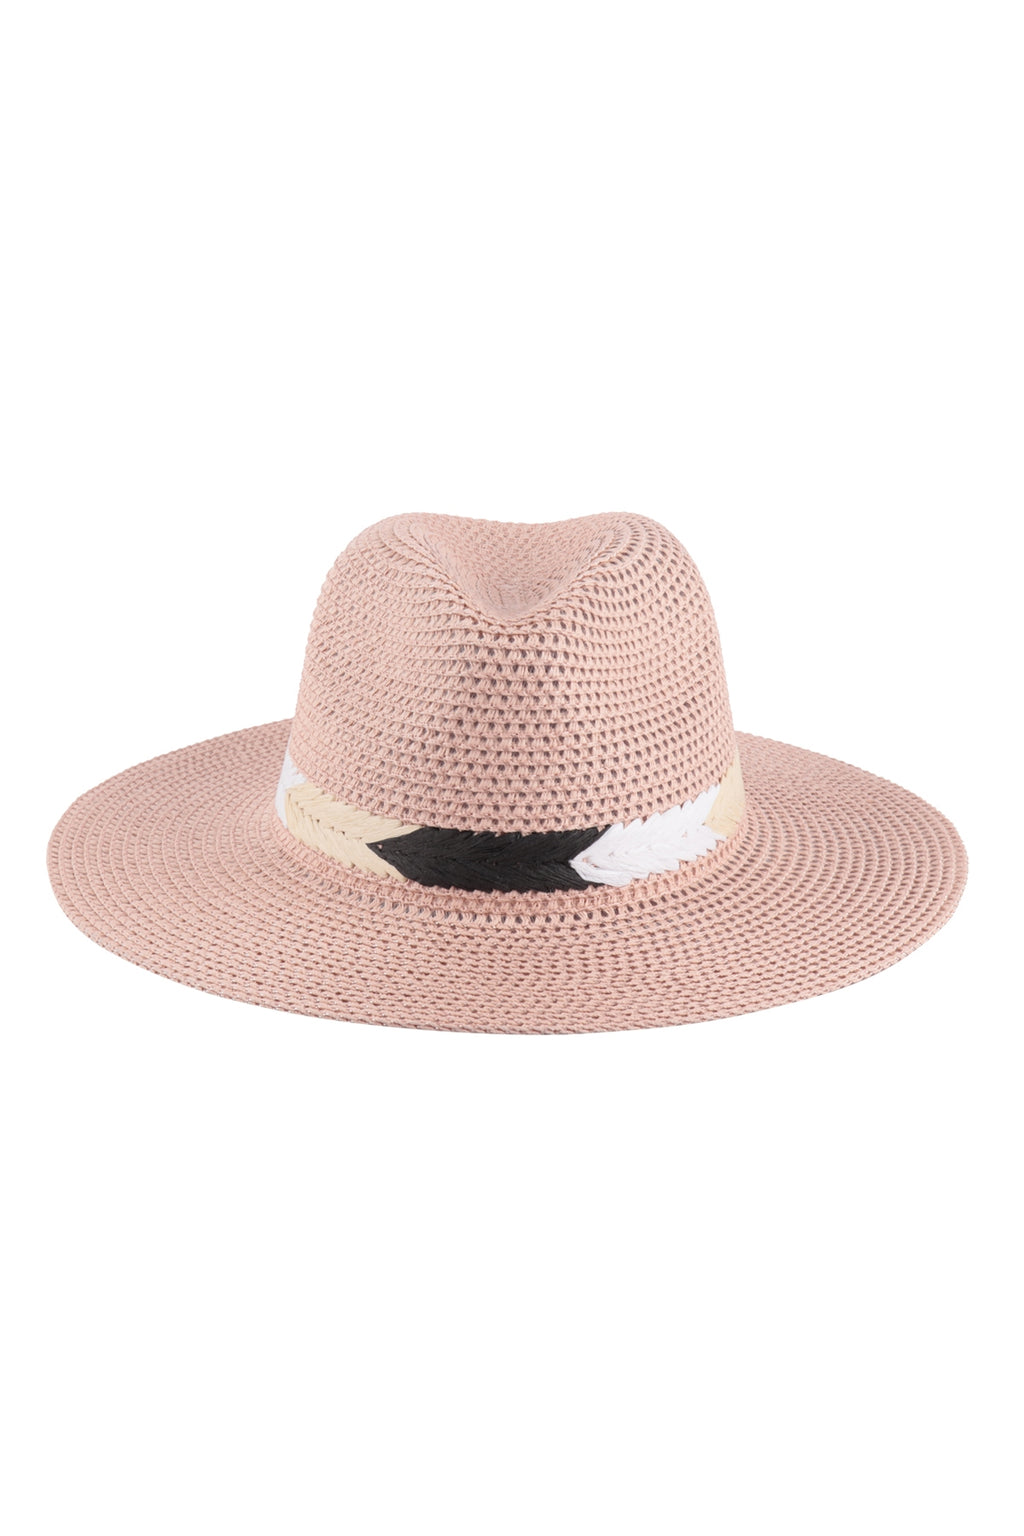 Panama Brim Summer Hat with Braided Stripe Accent Light Pink - Pack of 6